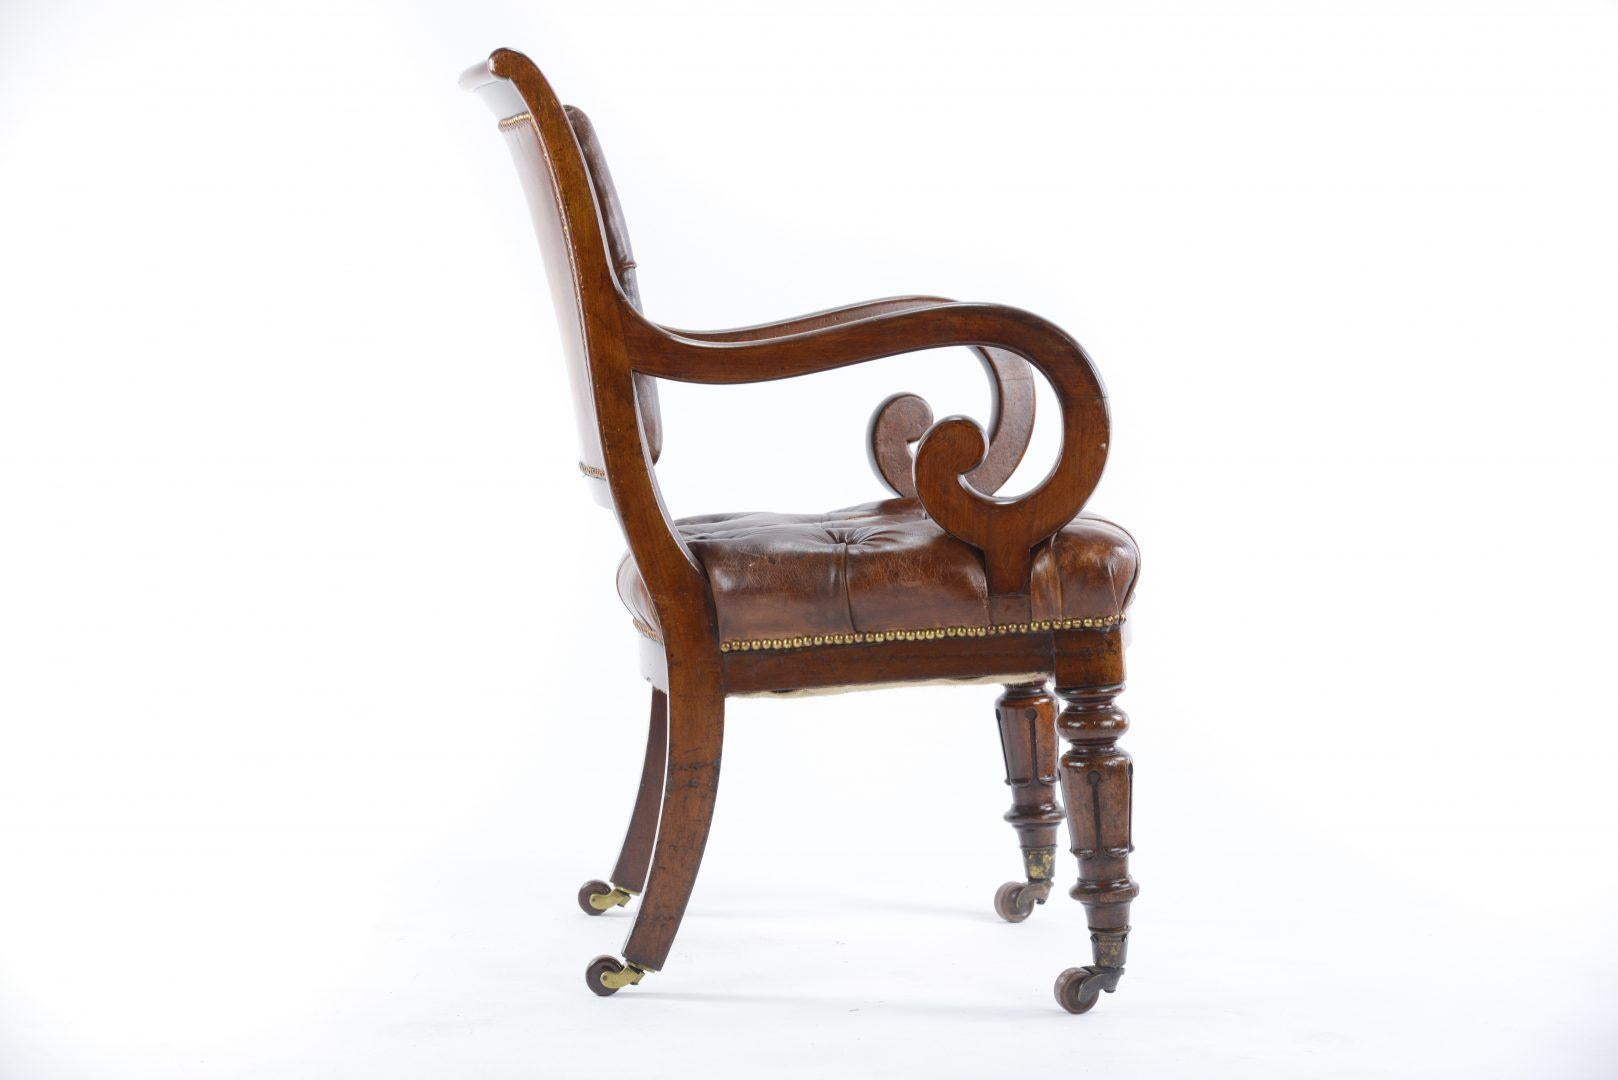 A William IV mahogany desk chair, now with deep buttoned brown leather upholstery on brass castors, attributed to Gillows.

Gillows of Lancaster and London, also known as Gillow & Co., was an English furniture making firm based in Lancaster,